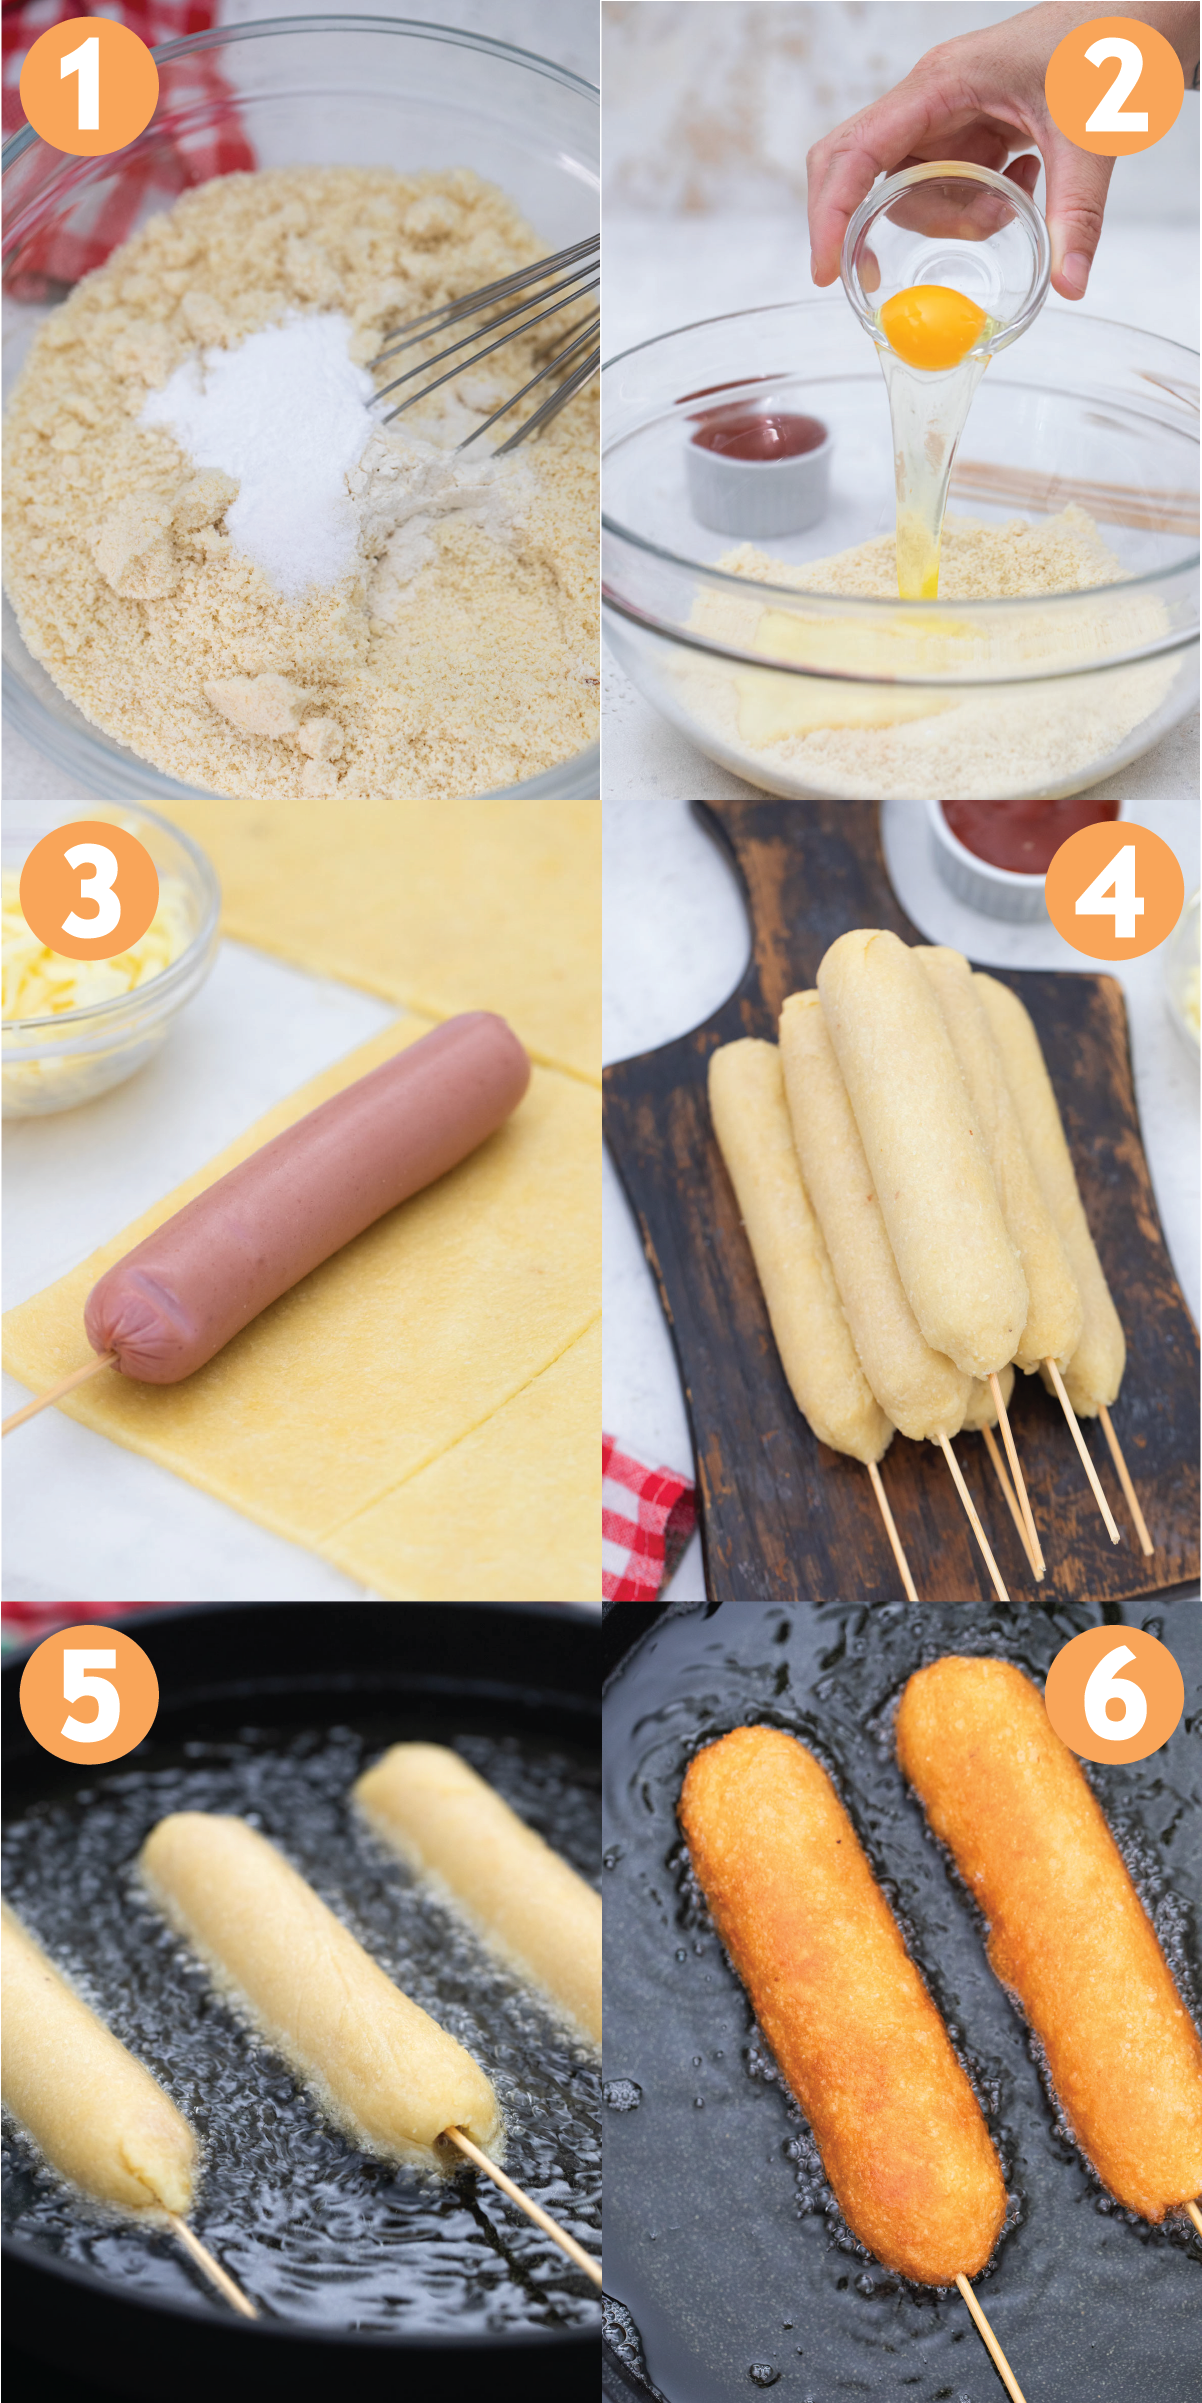 How to Make Keto Corn Dogs - instructions